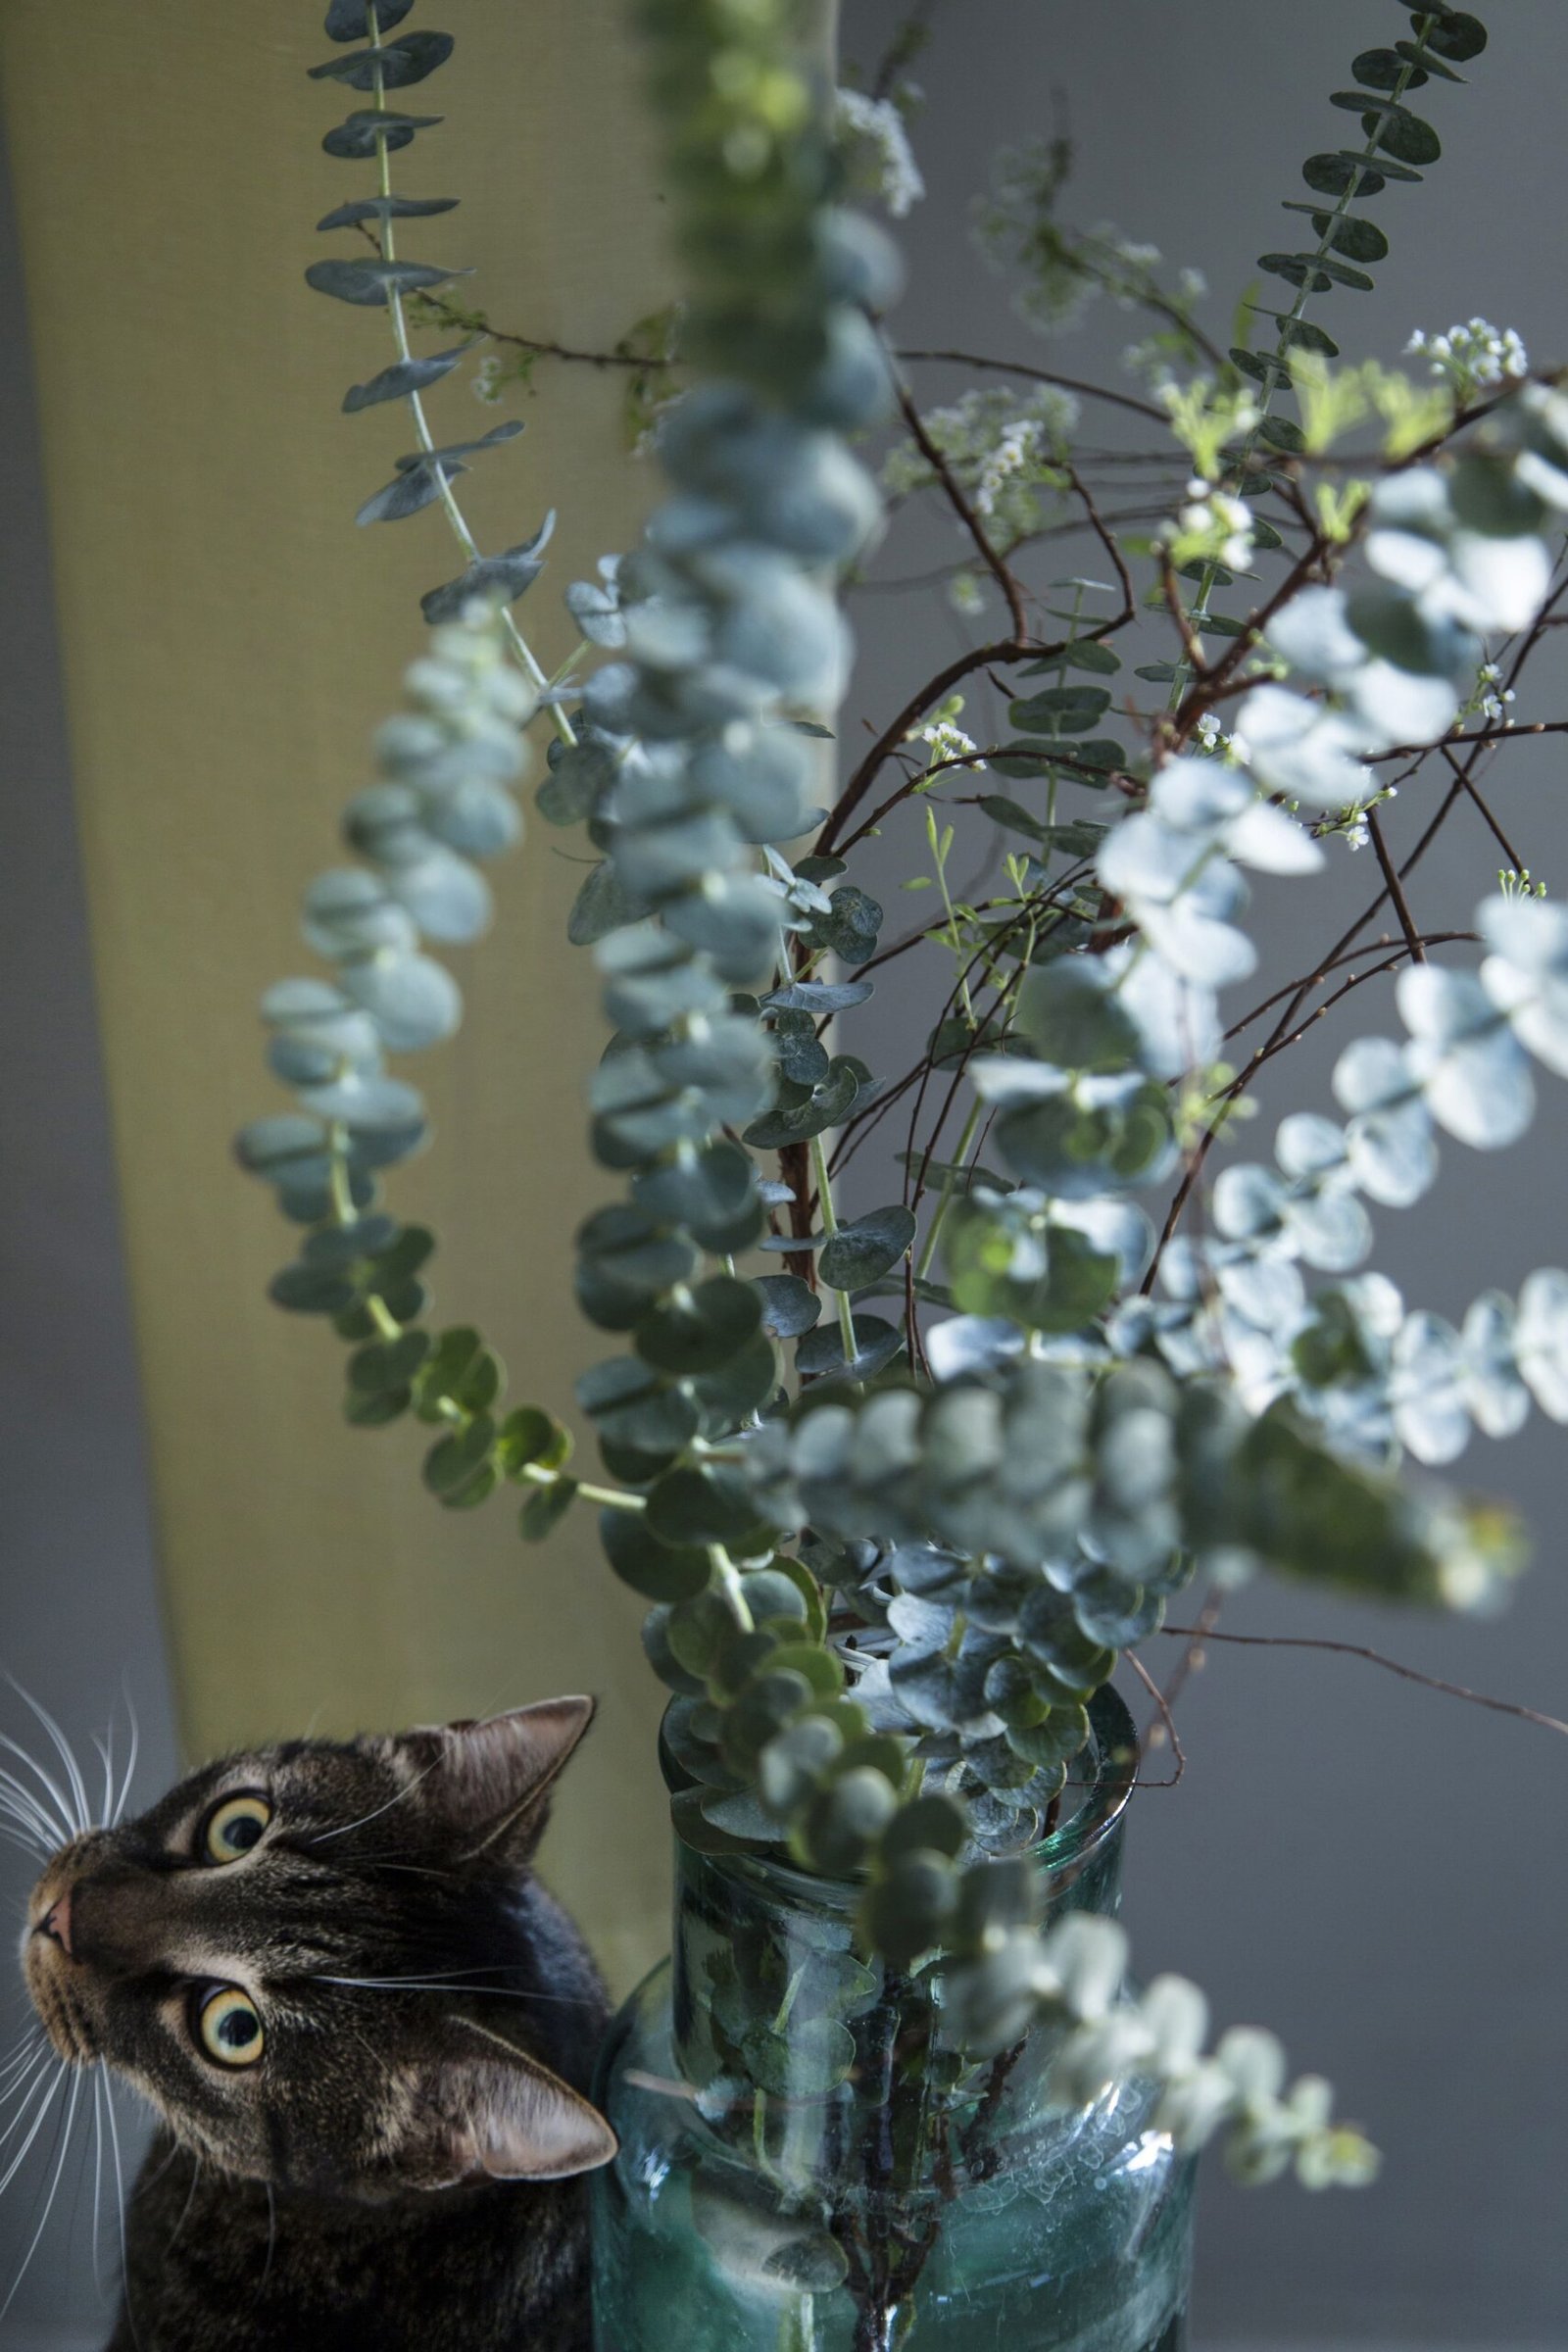 Toxicity of Eucalyptus for Cats